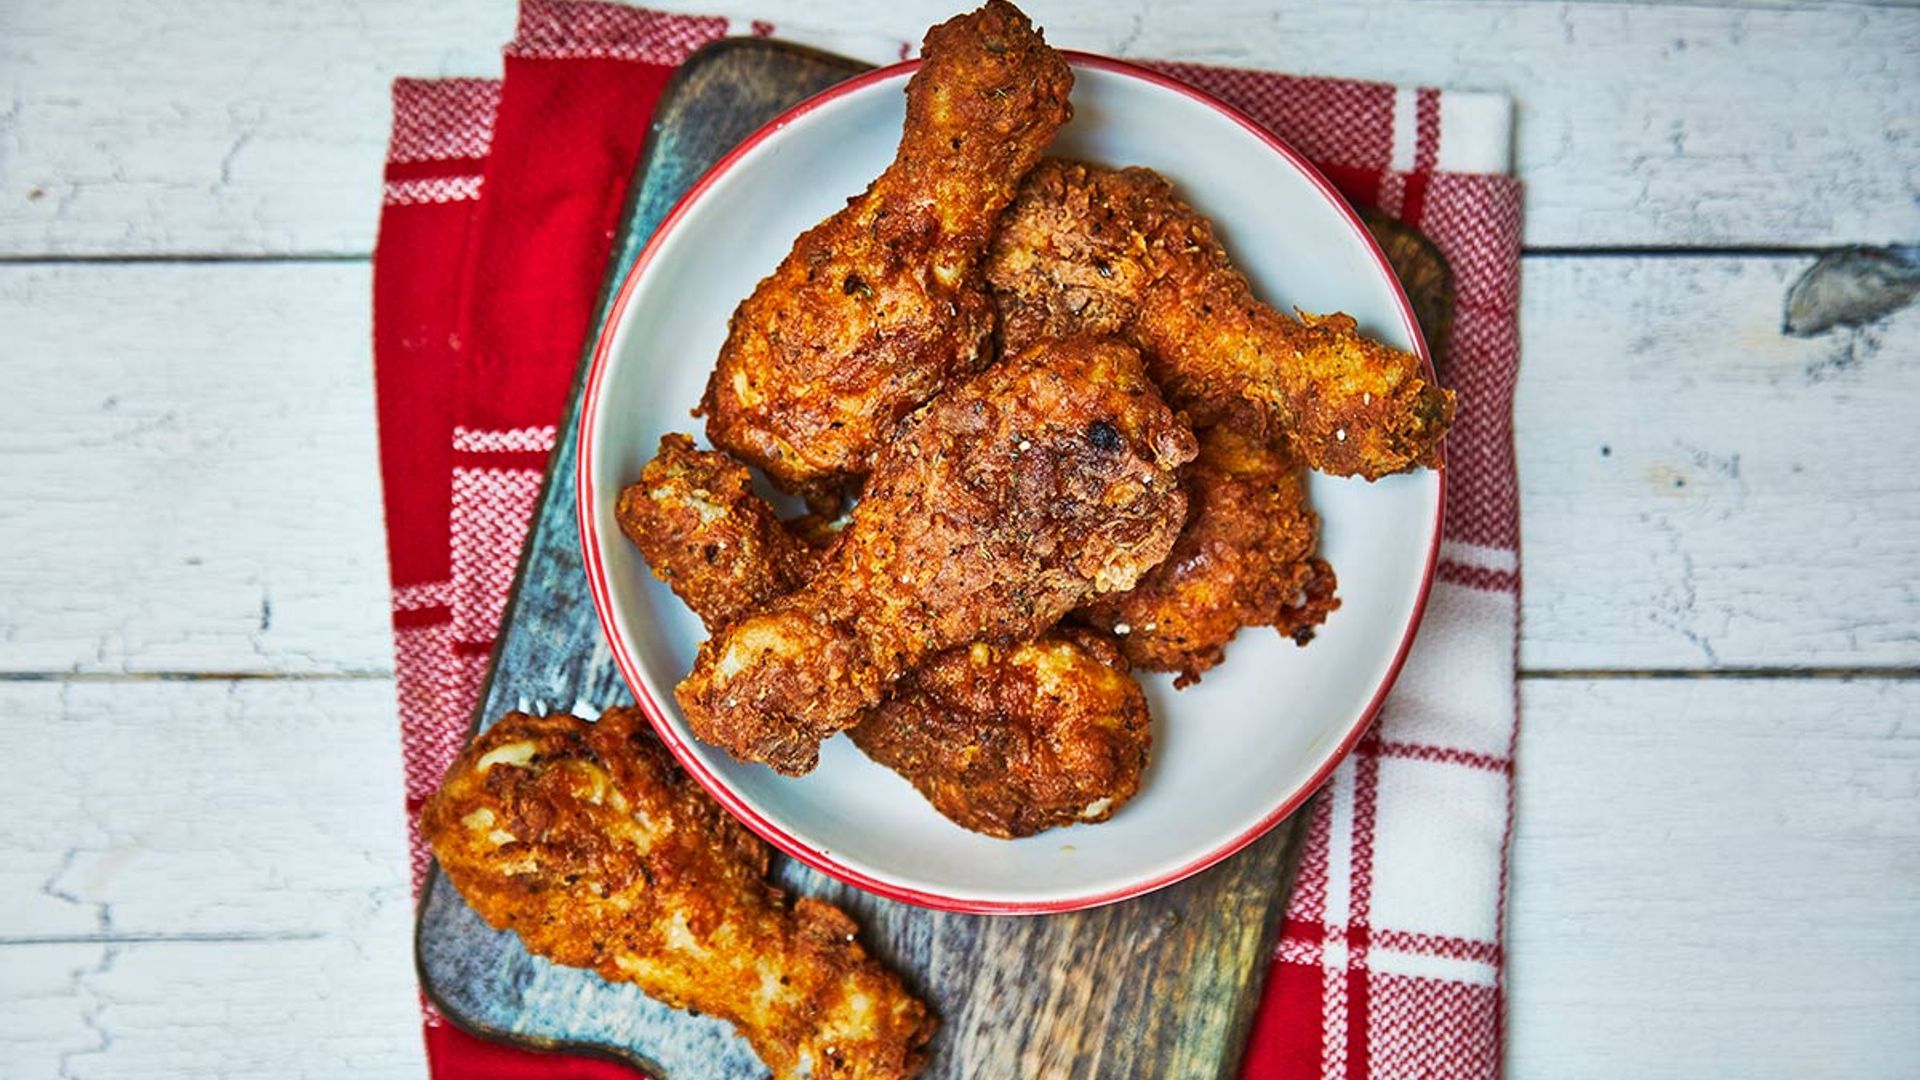 KFC-inspired chicken for the bank holiday weekend – just what we all need!